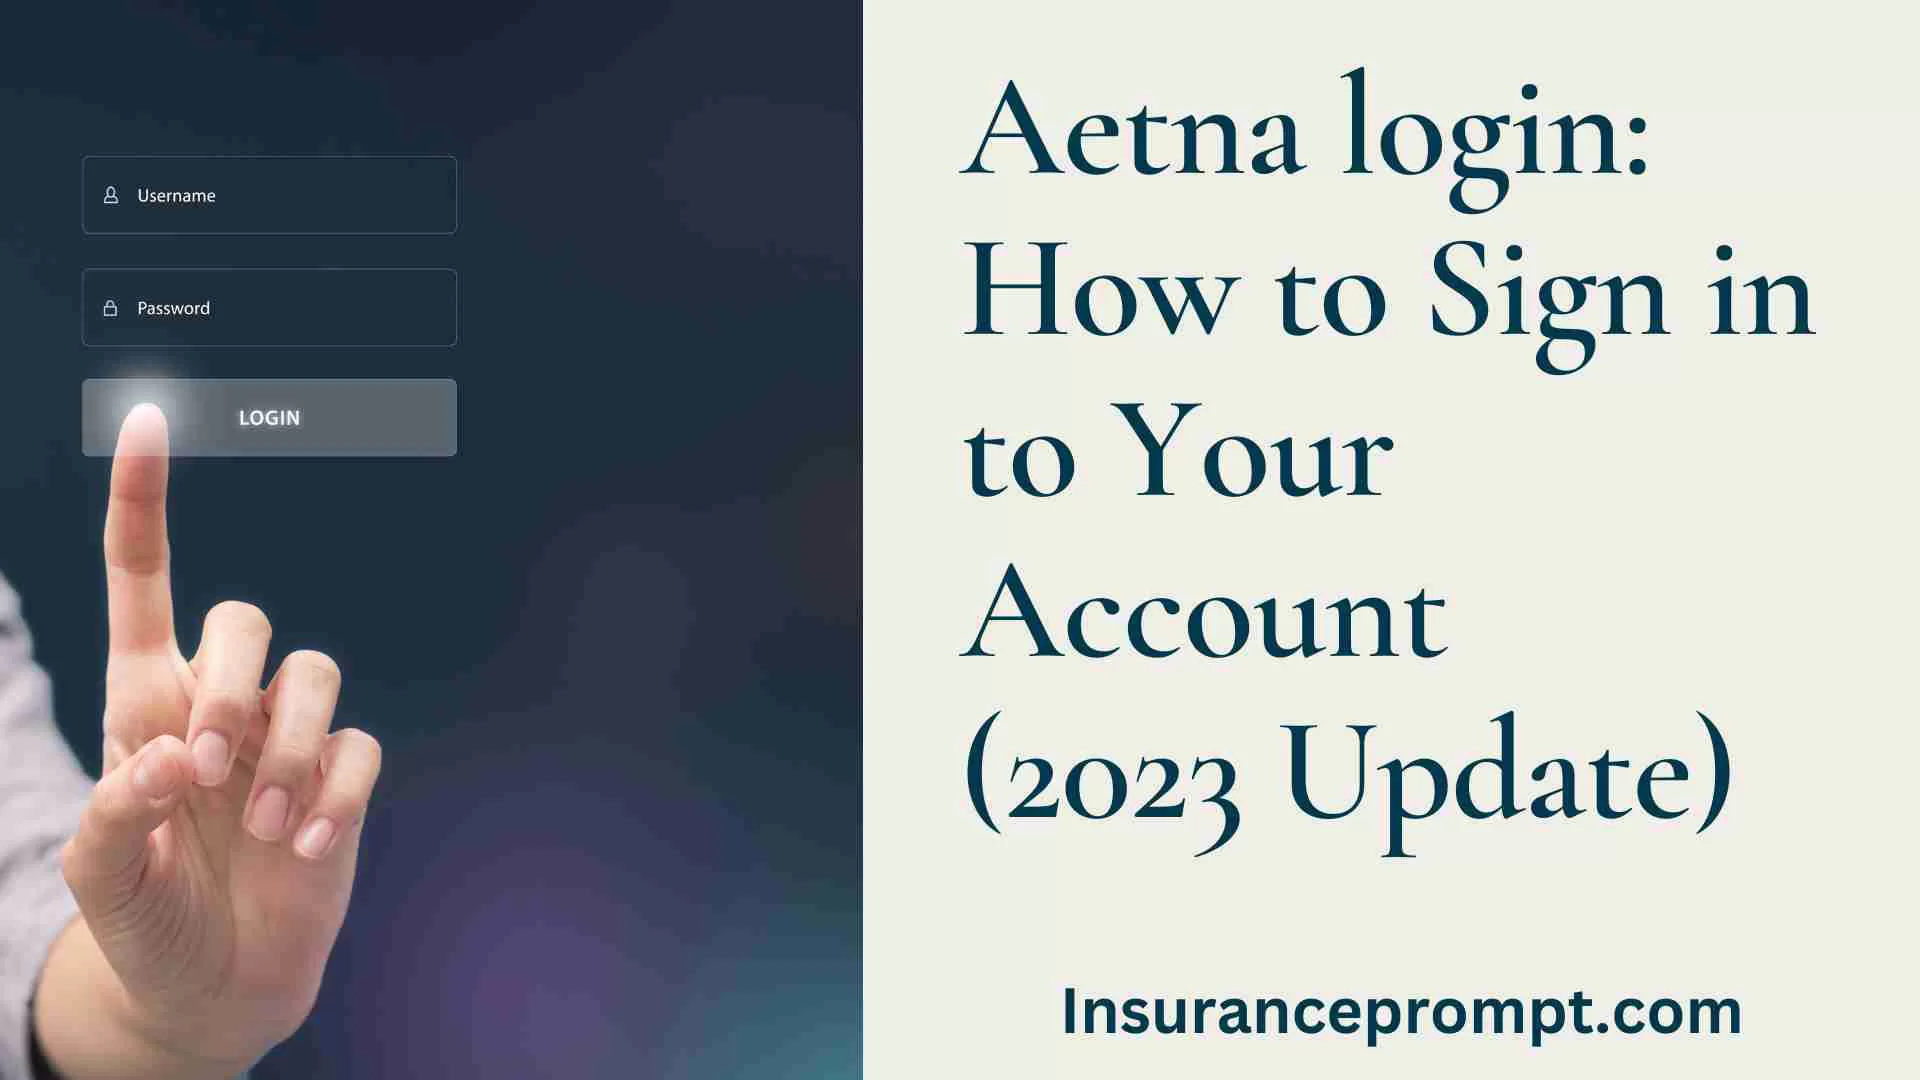 Aetna login How to Sign in to Your Account (2023 Update)